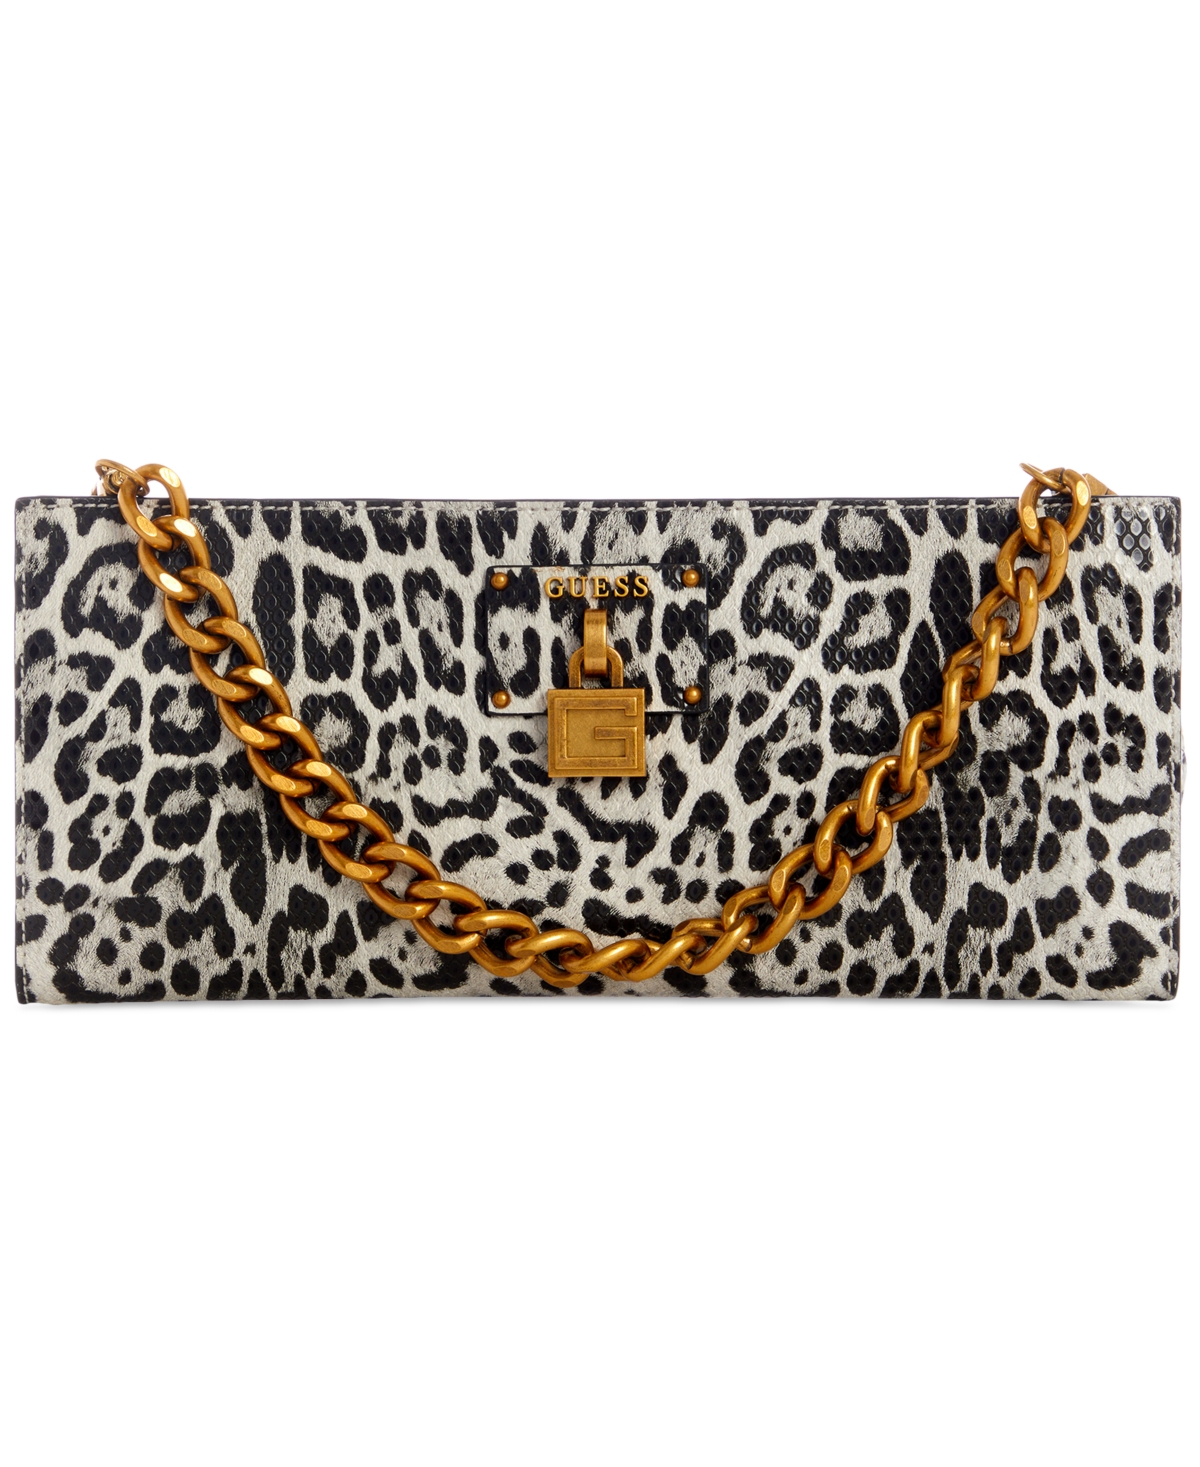 Guess Centre Stage Top Zip Clutch In Black/white Leopard